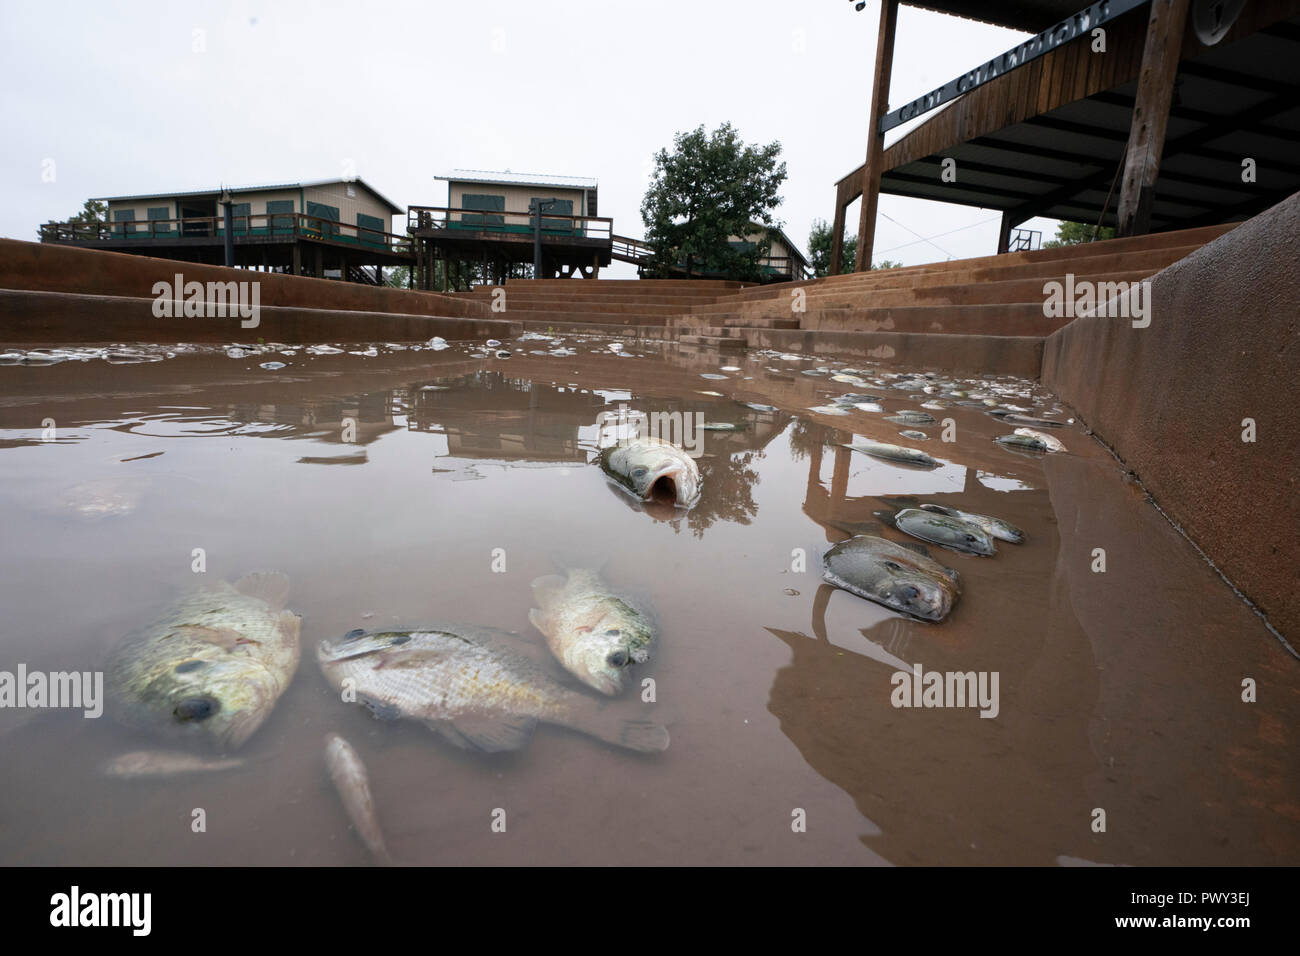 Dead and dying fish on the shore of Lake LBJ as floodwaters start to recede. The area was hard hit by record rains along the Llano River that raised lake levels rapidly and stranded fish in shallows. Stock Photo